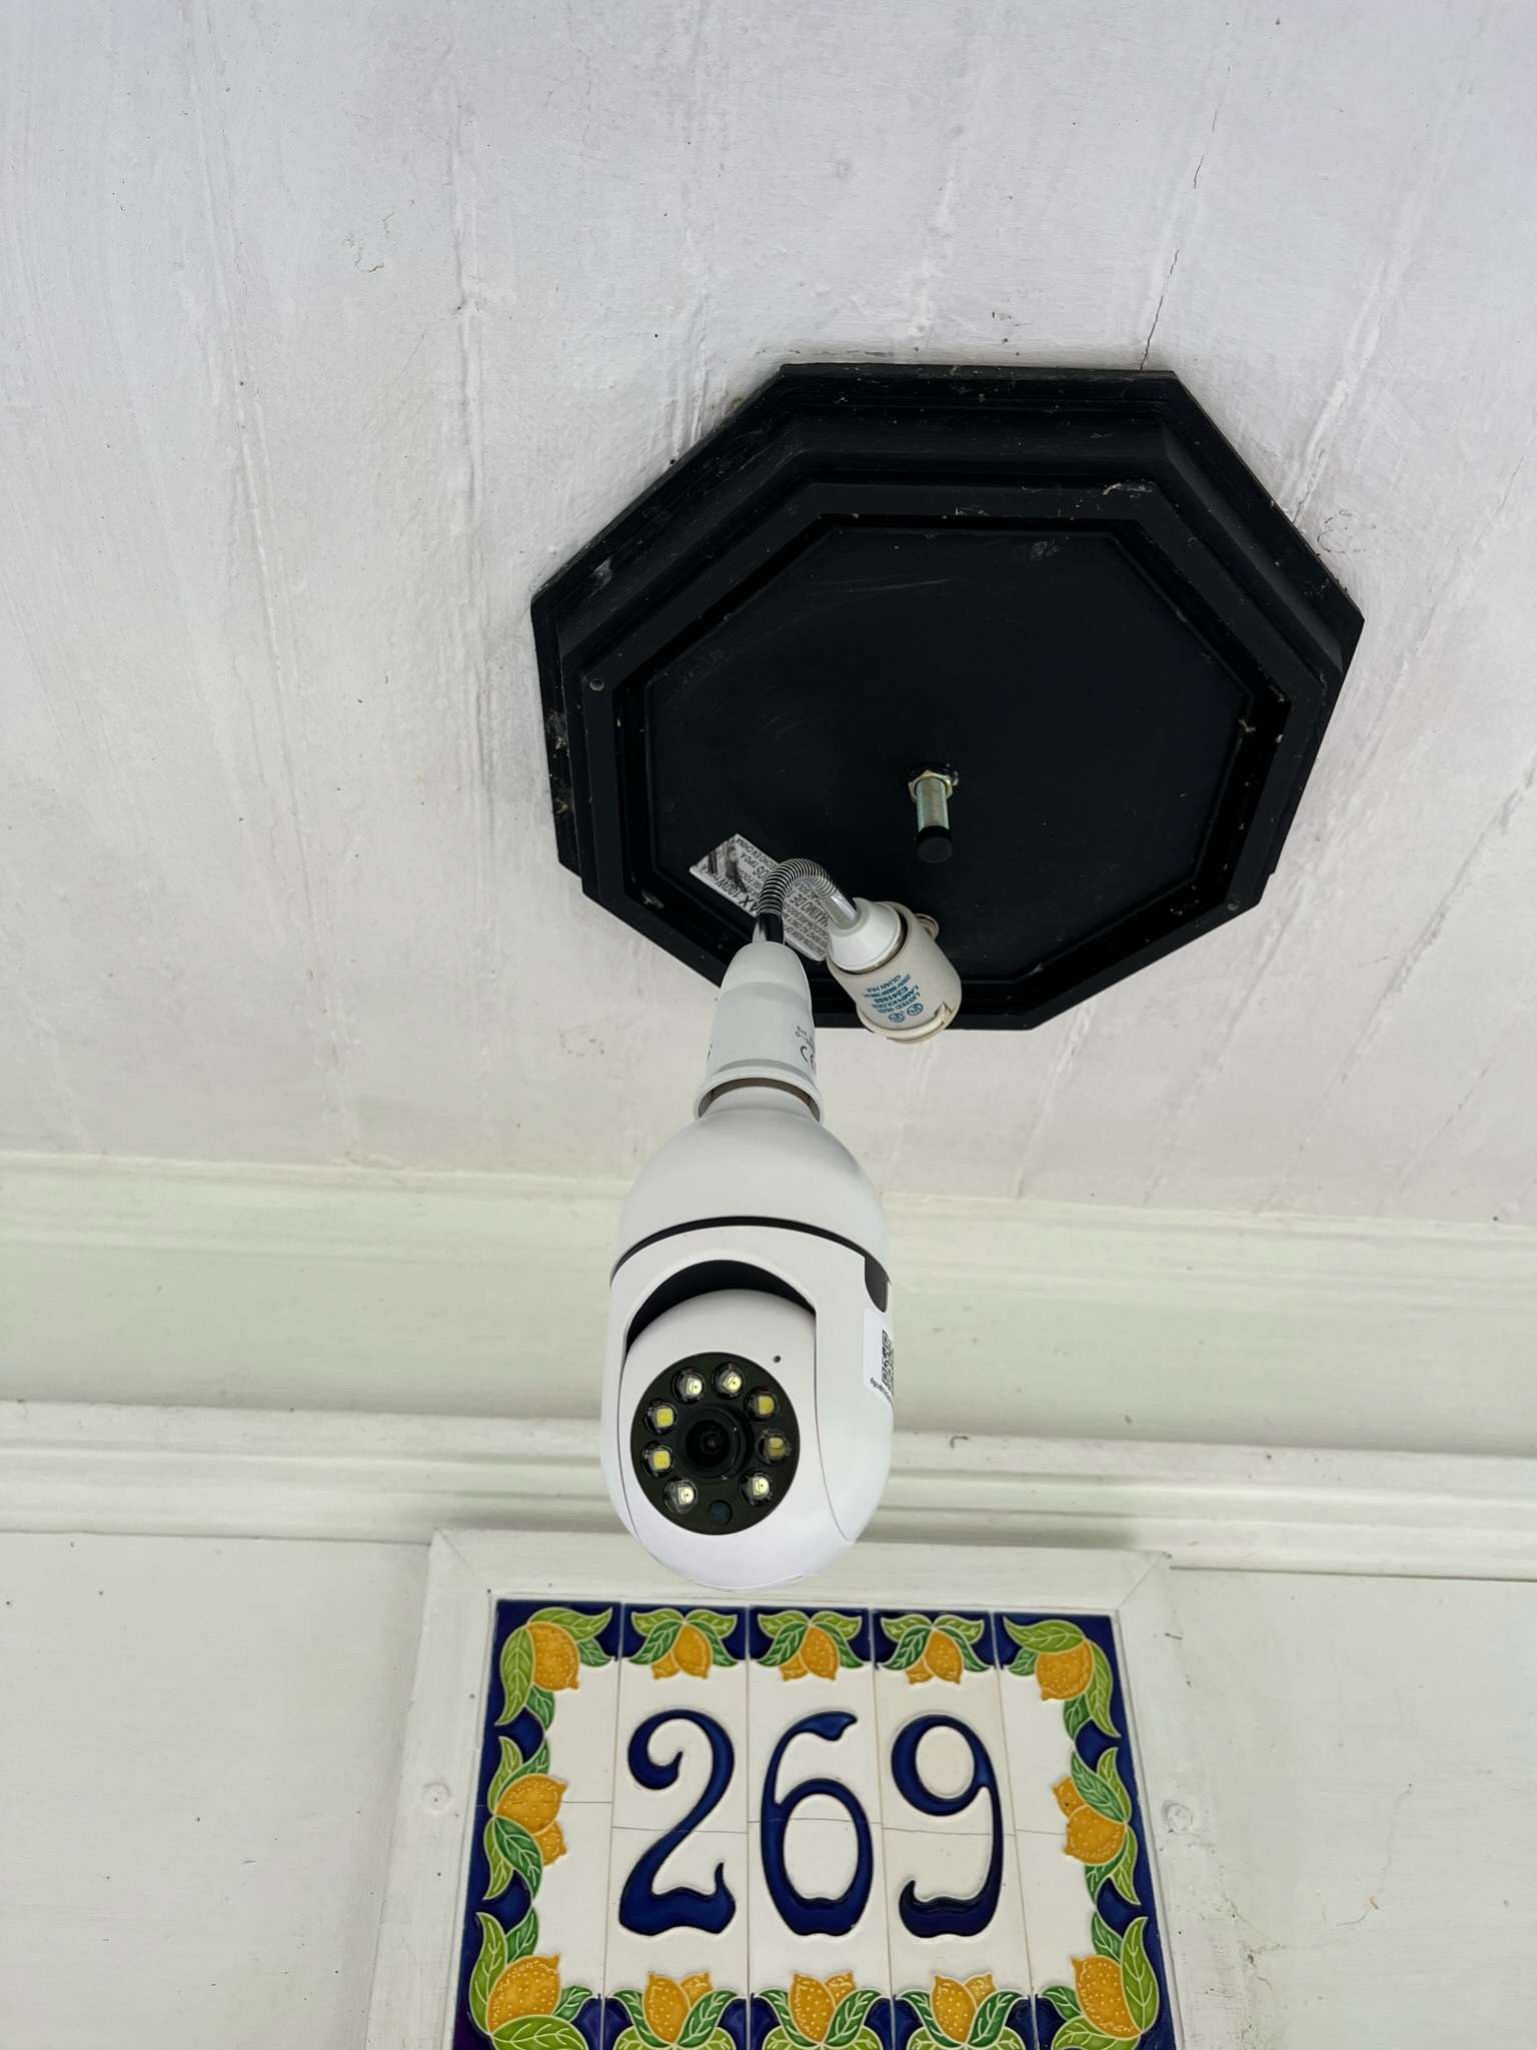 Nomad Security Camera Deal